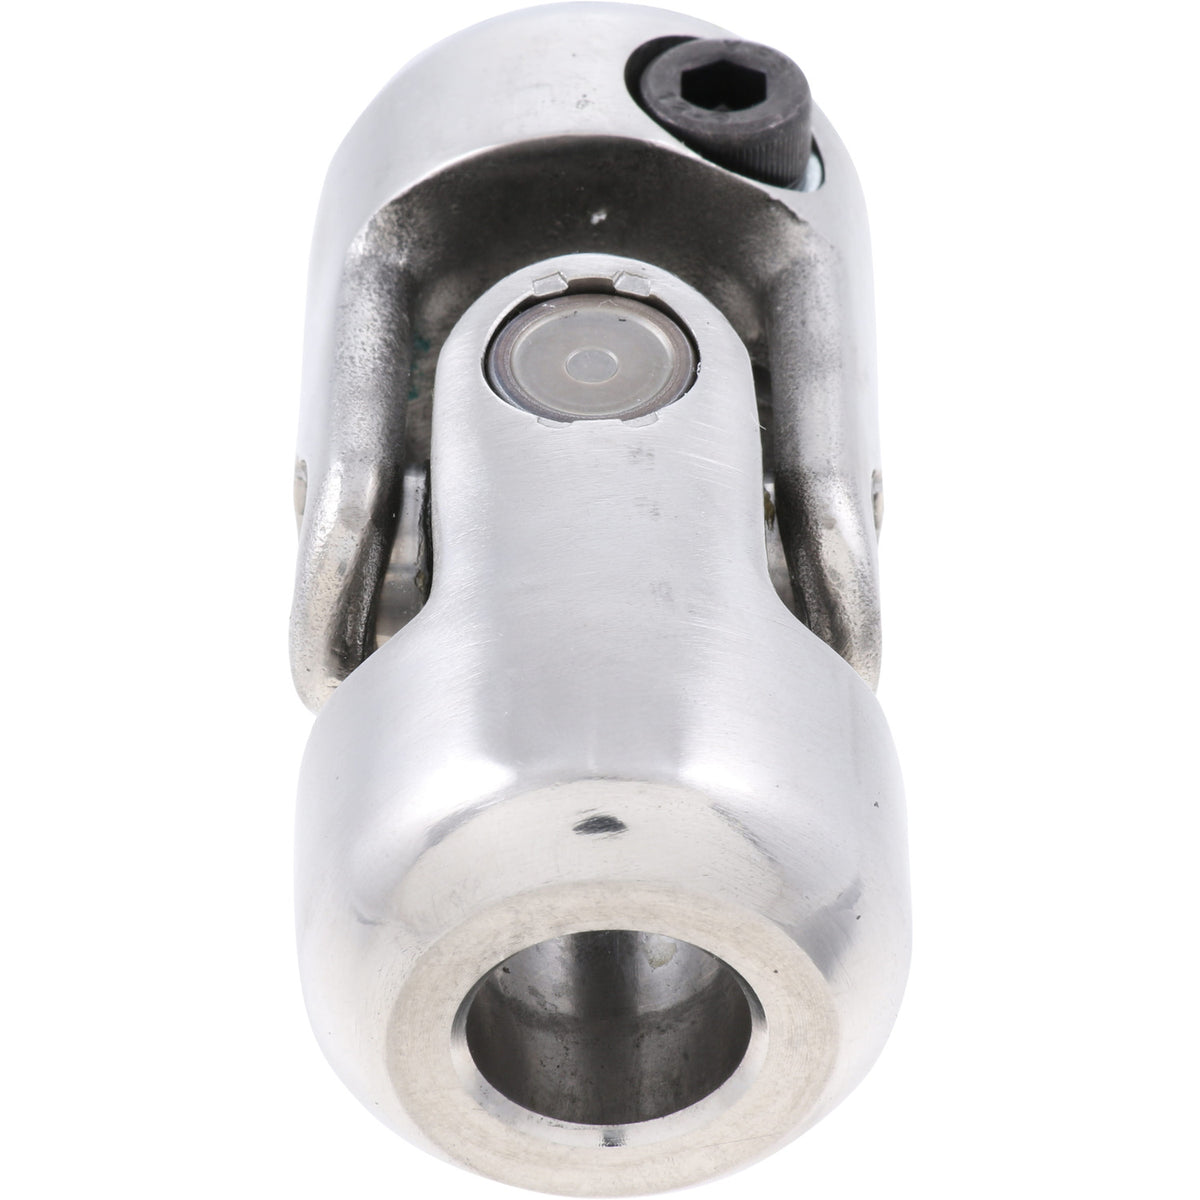 CRL WCM618 45 Degree Universal Joint with Pole Eye for 5/16 Spline Size 